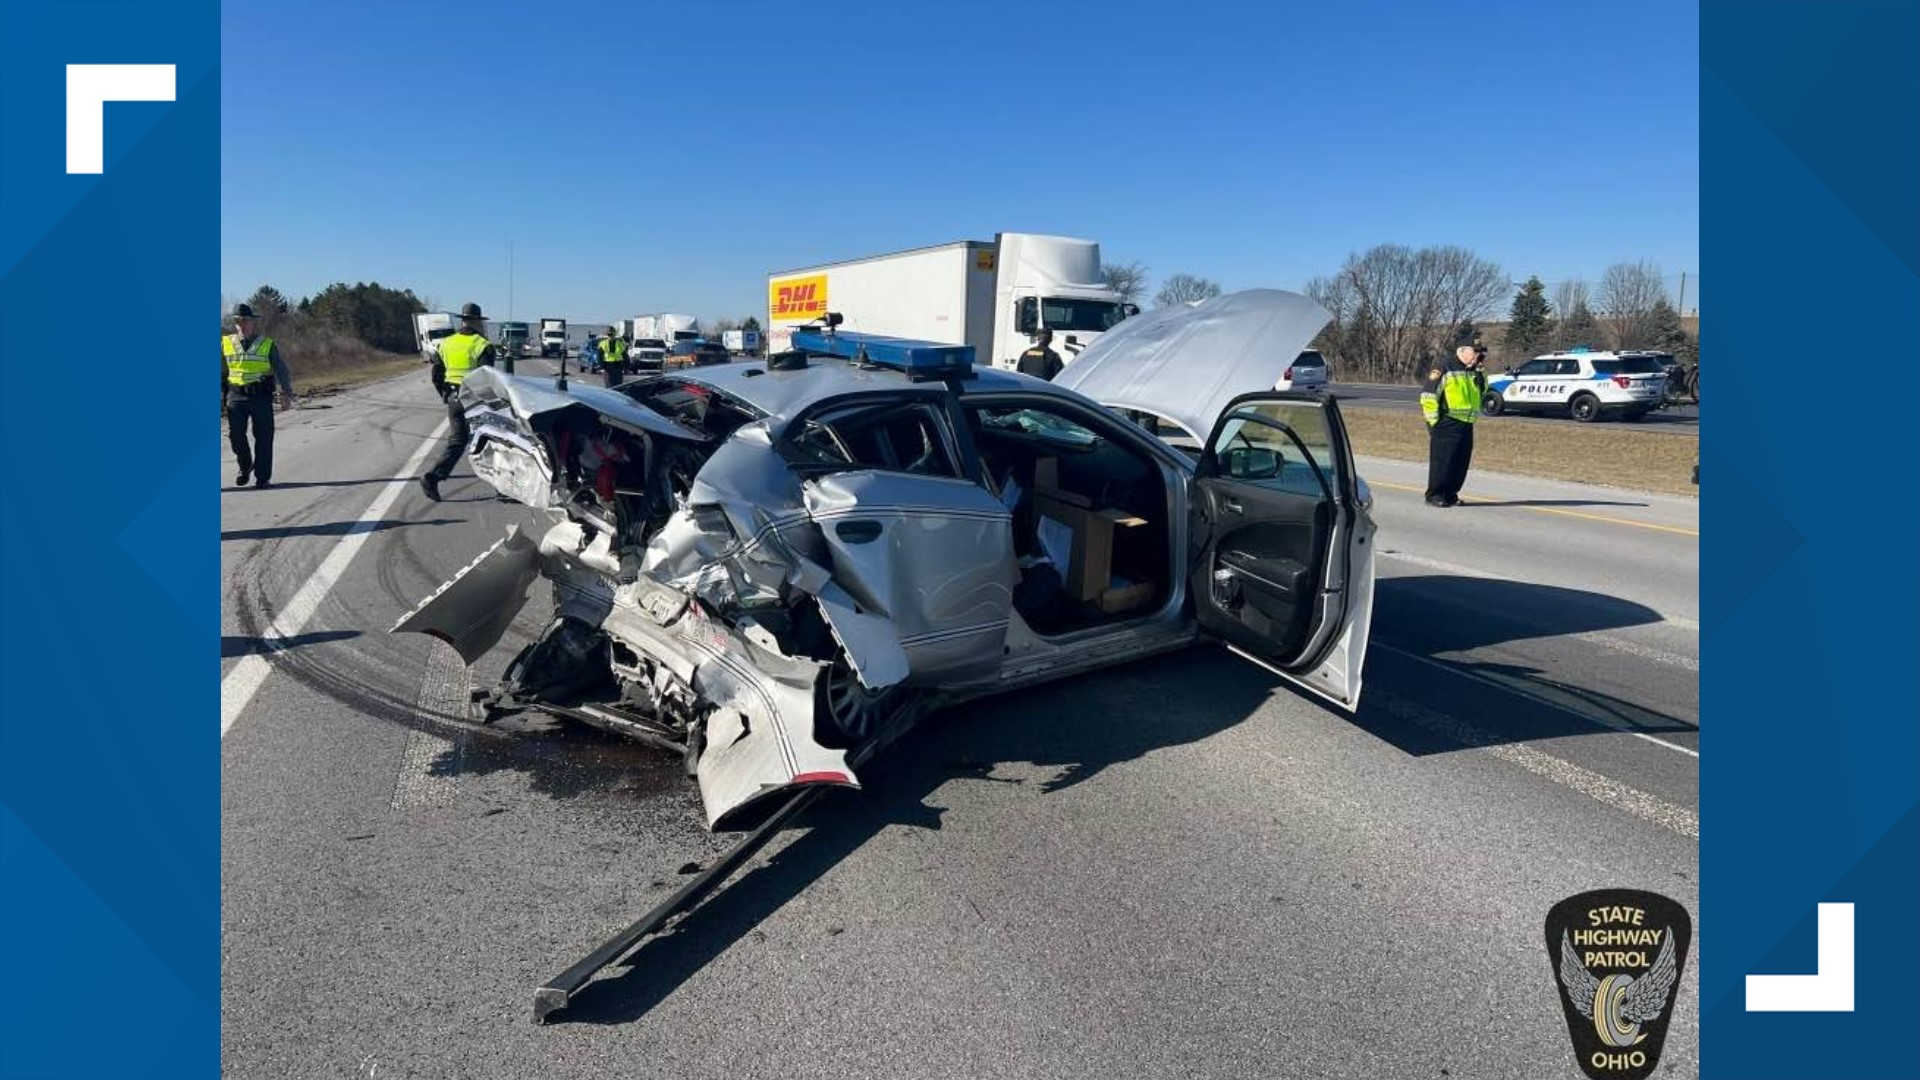 The trooper was removing debris from the road when a vehicle struck his cruiser. The impact caused the cruiser to move forward, hitting the trooper.